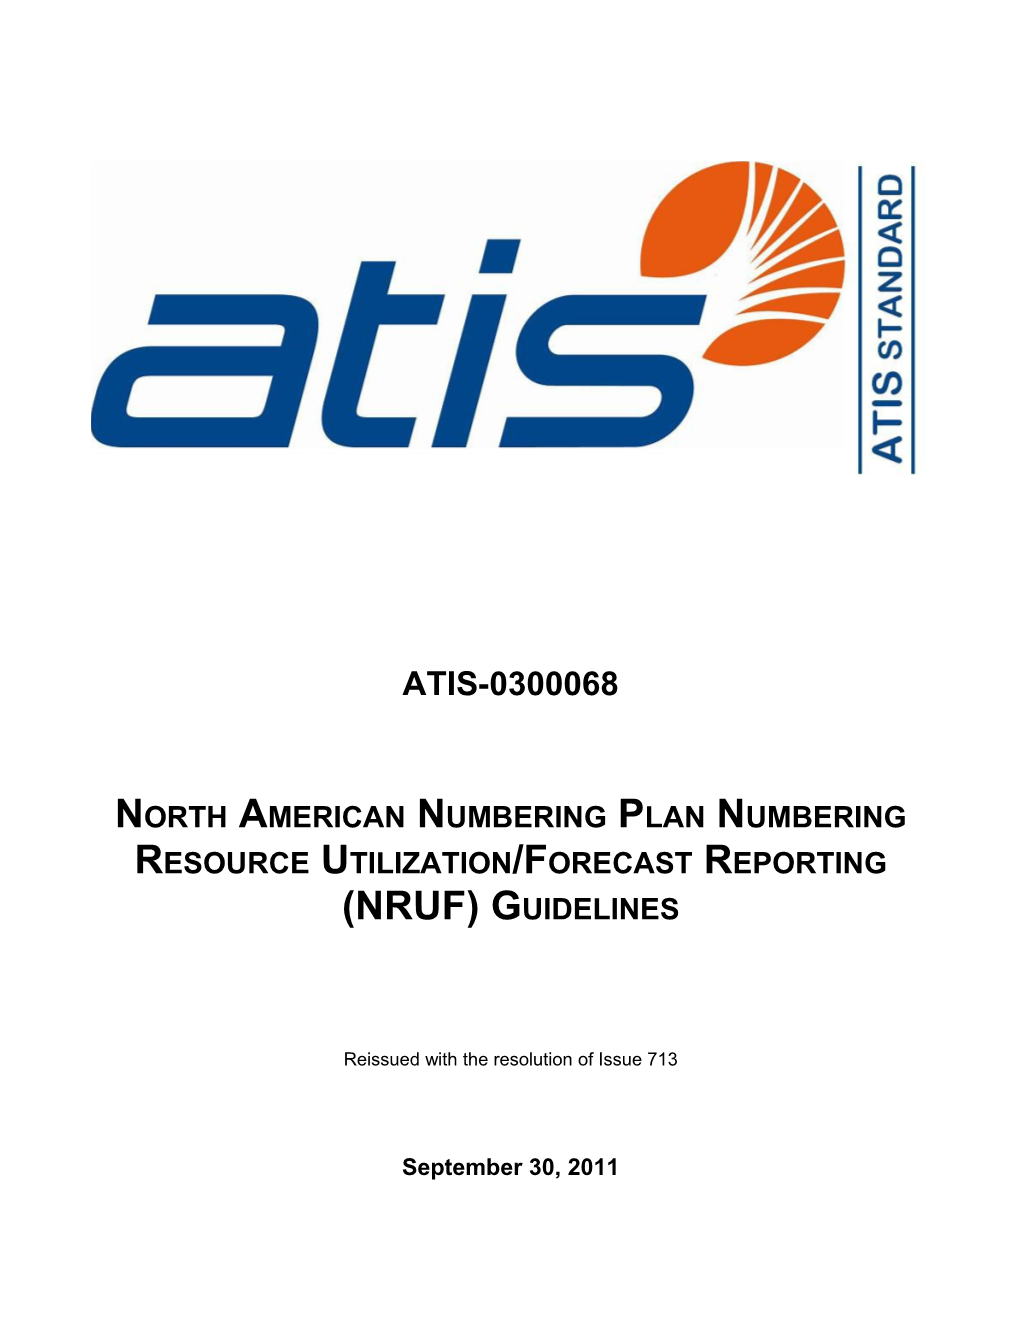 North American Numbering Plan Numbering Resource Utilization/Forecast Reporting (NRUF) s1